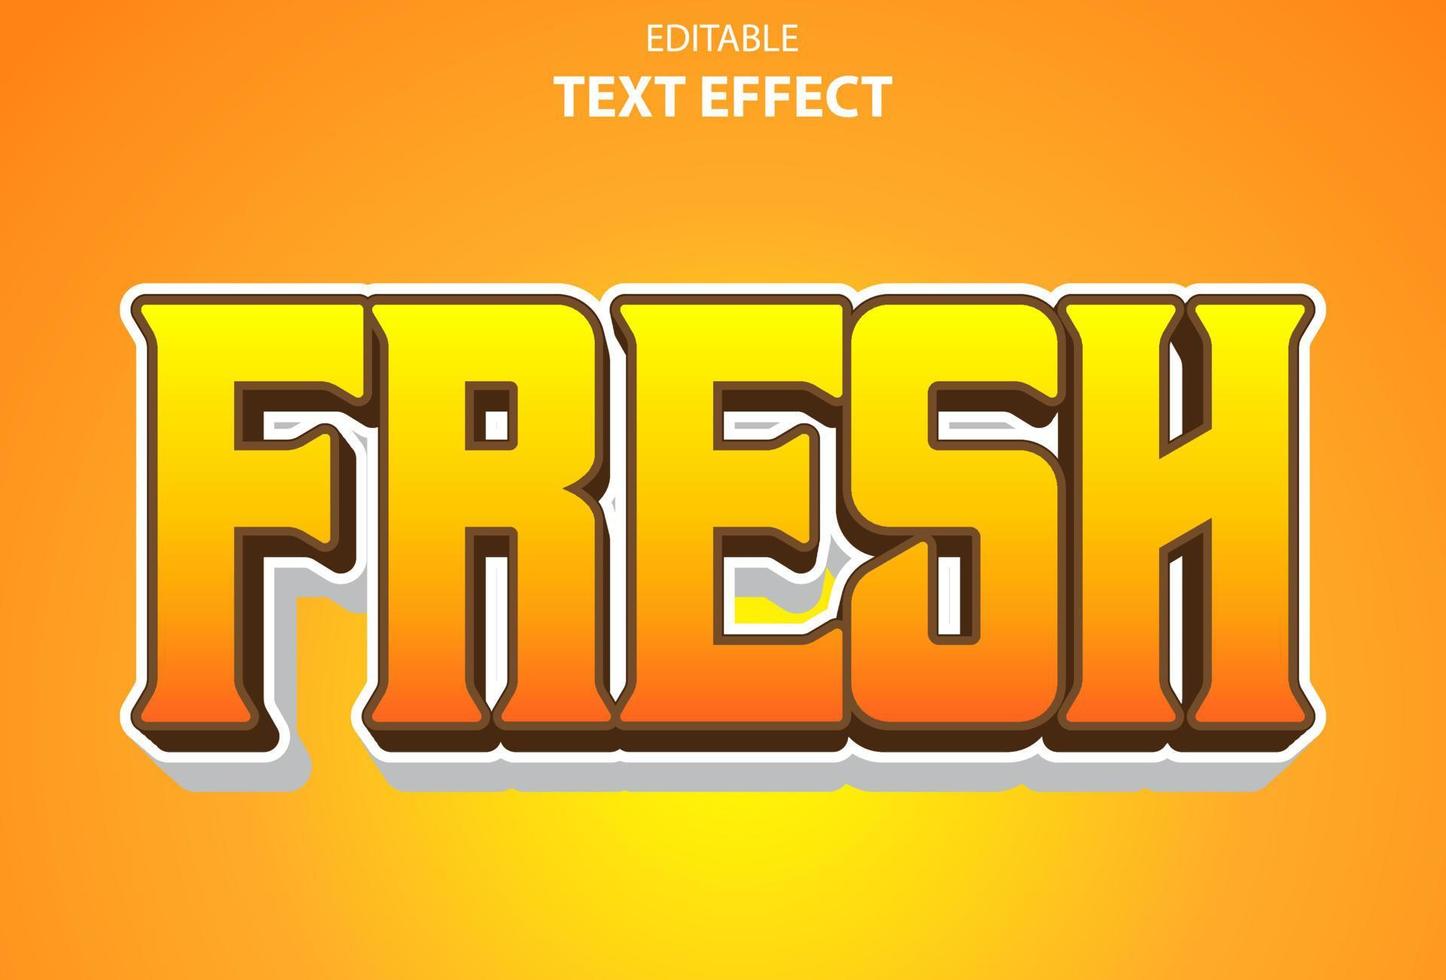 fresh text effect with orange color 3d style for template. vector